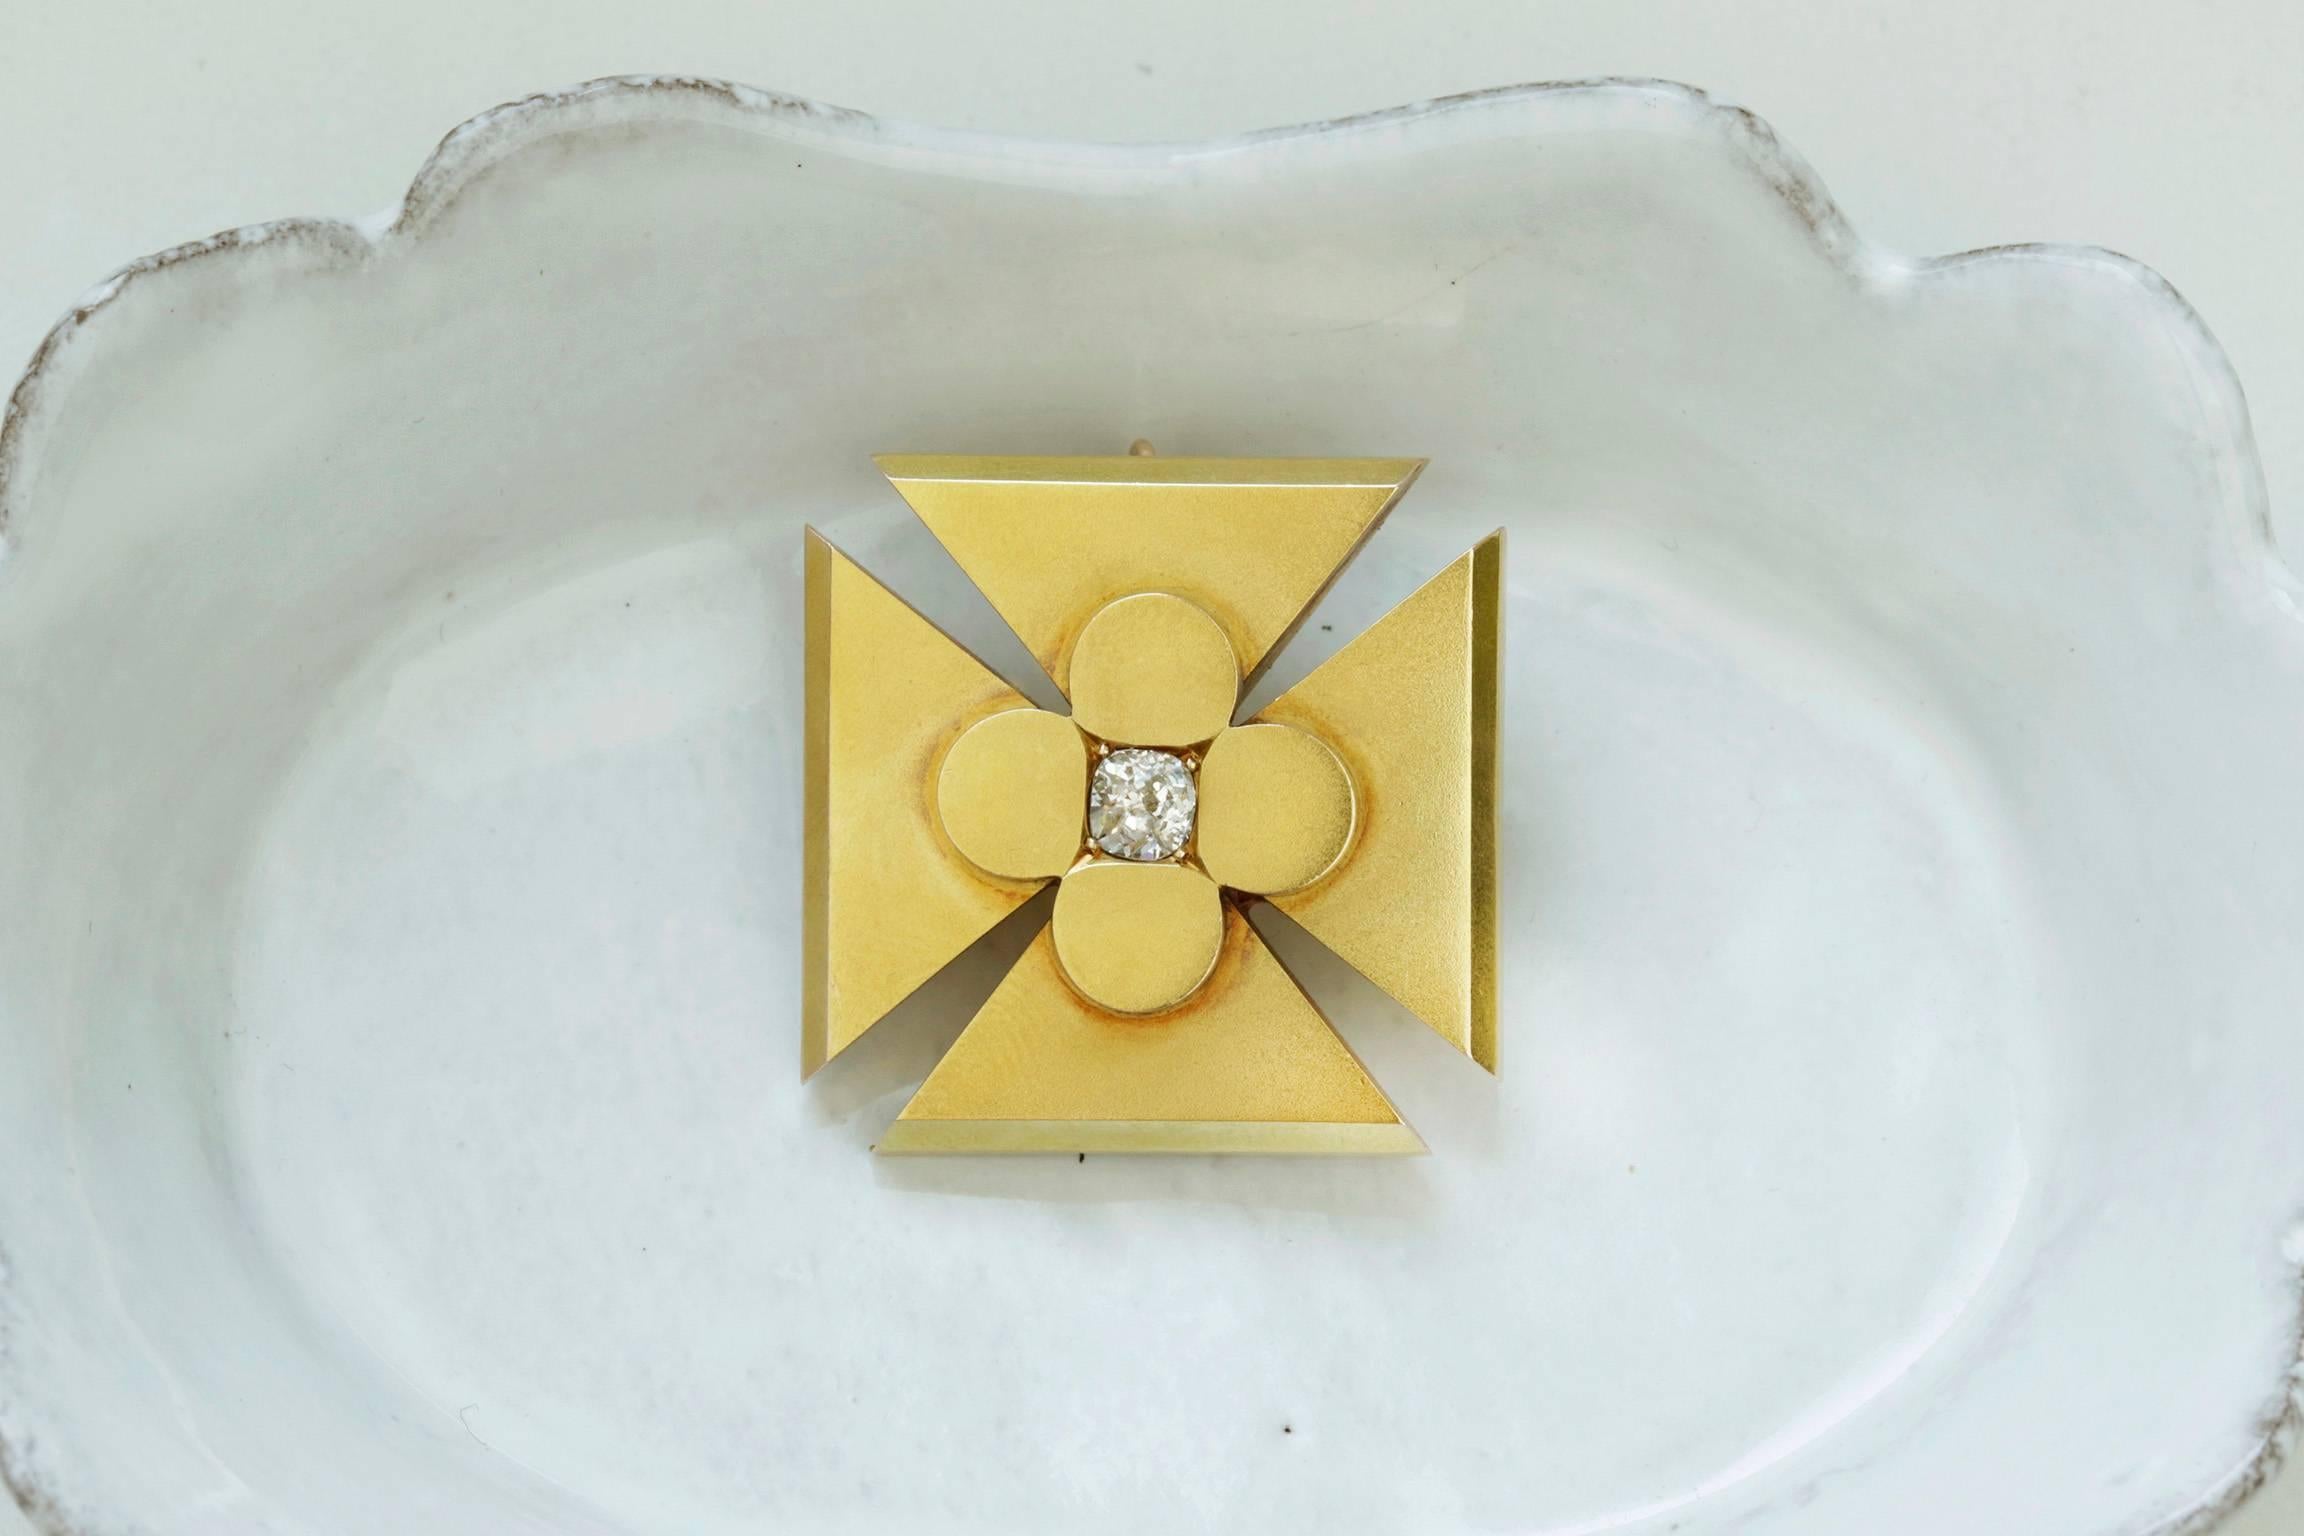 A Victorian maltese cross pendant with an old mine cut diamond at the center. The pendant can be worn as a brooch too. The stone is bright, and the pendant is set in 15k yellow gold. It is paired with a Victorian snake chain in the last photo.